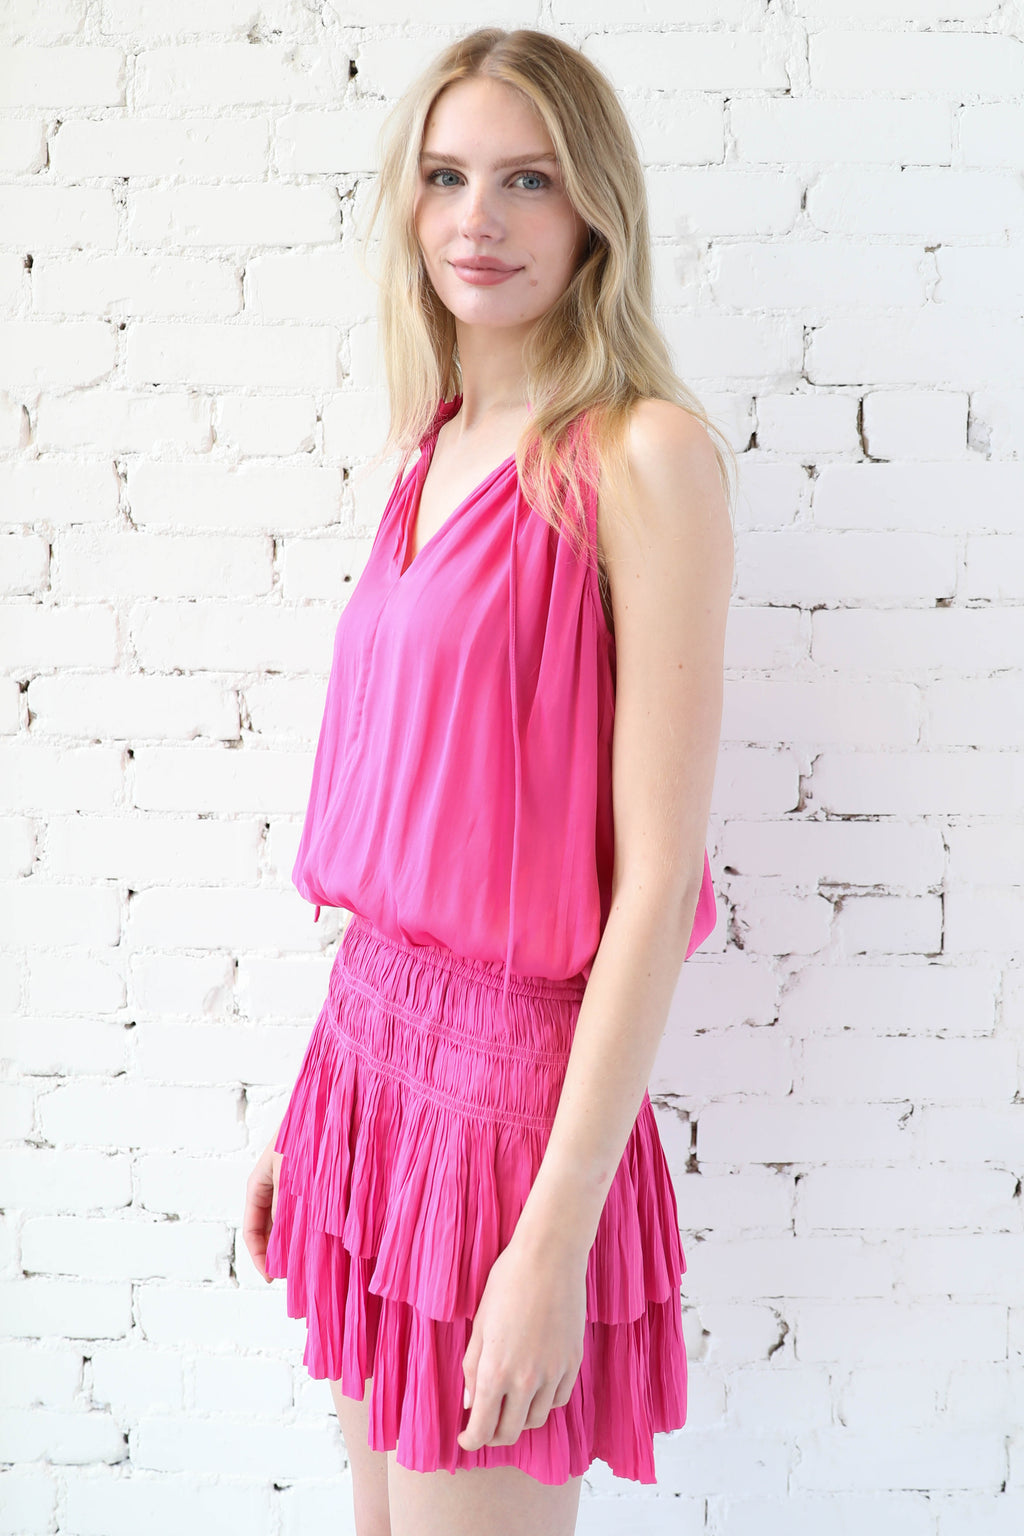 AVERY RAYNE </br>Sleeveless Dress With Pleated Details